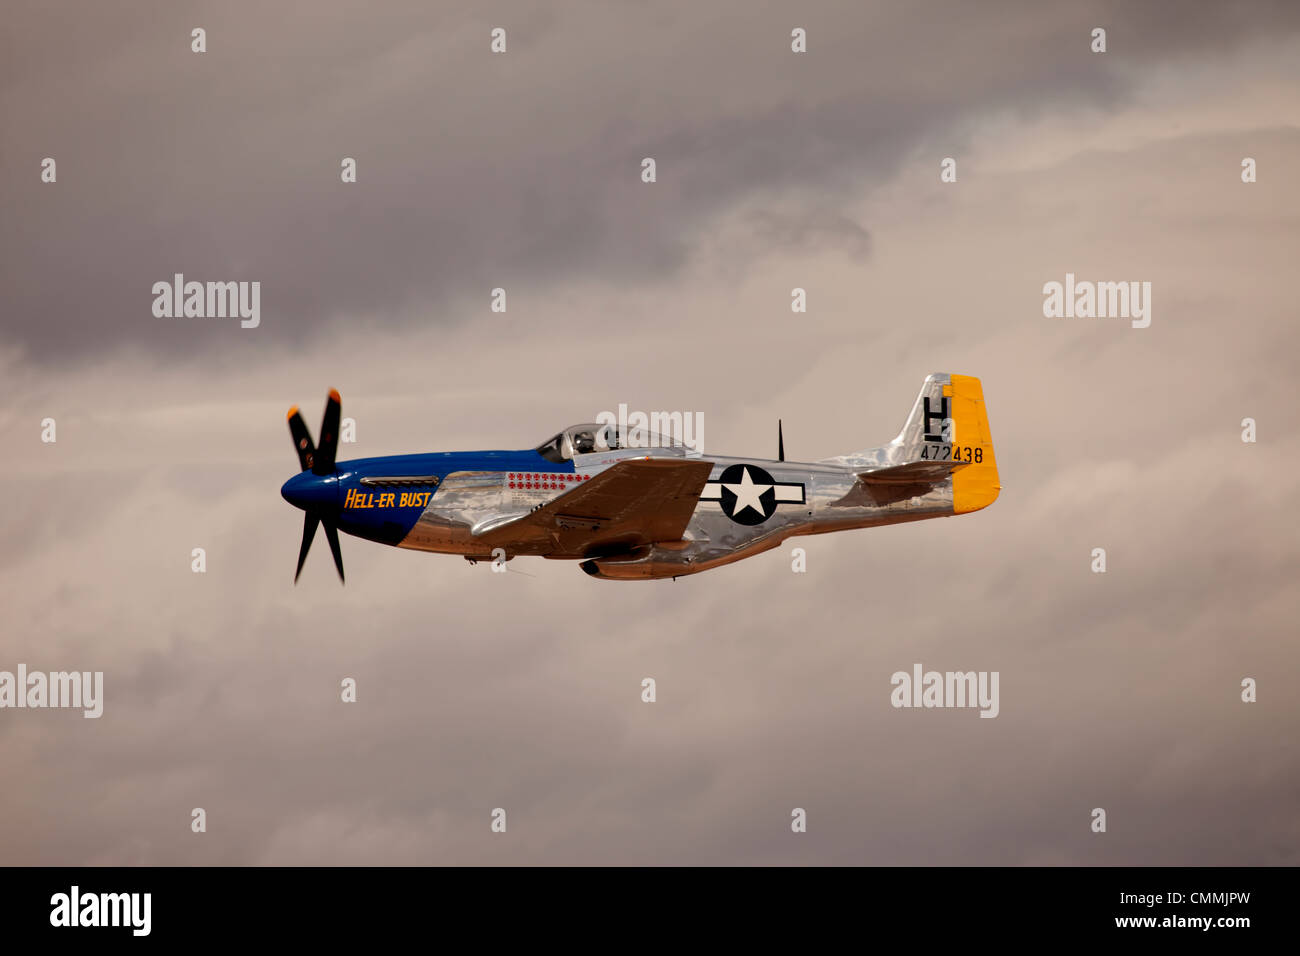 Fly by of P-51 Mustang air superiority fighter from World War II. Nose art Heller Bust. Flight with storm clouds. Stock Photo